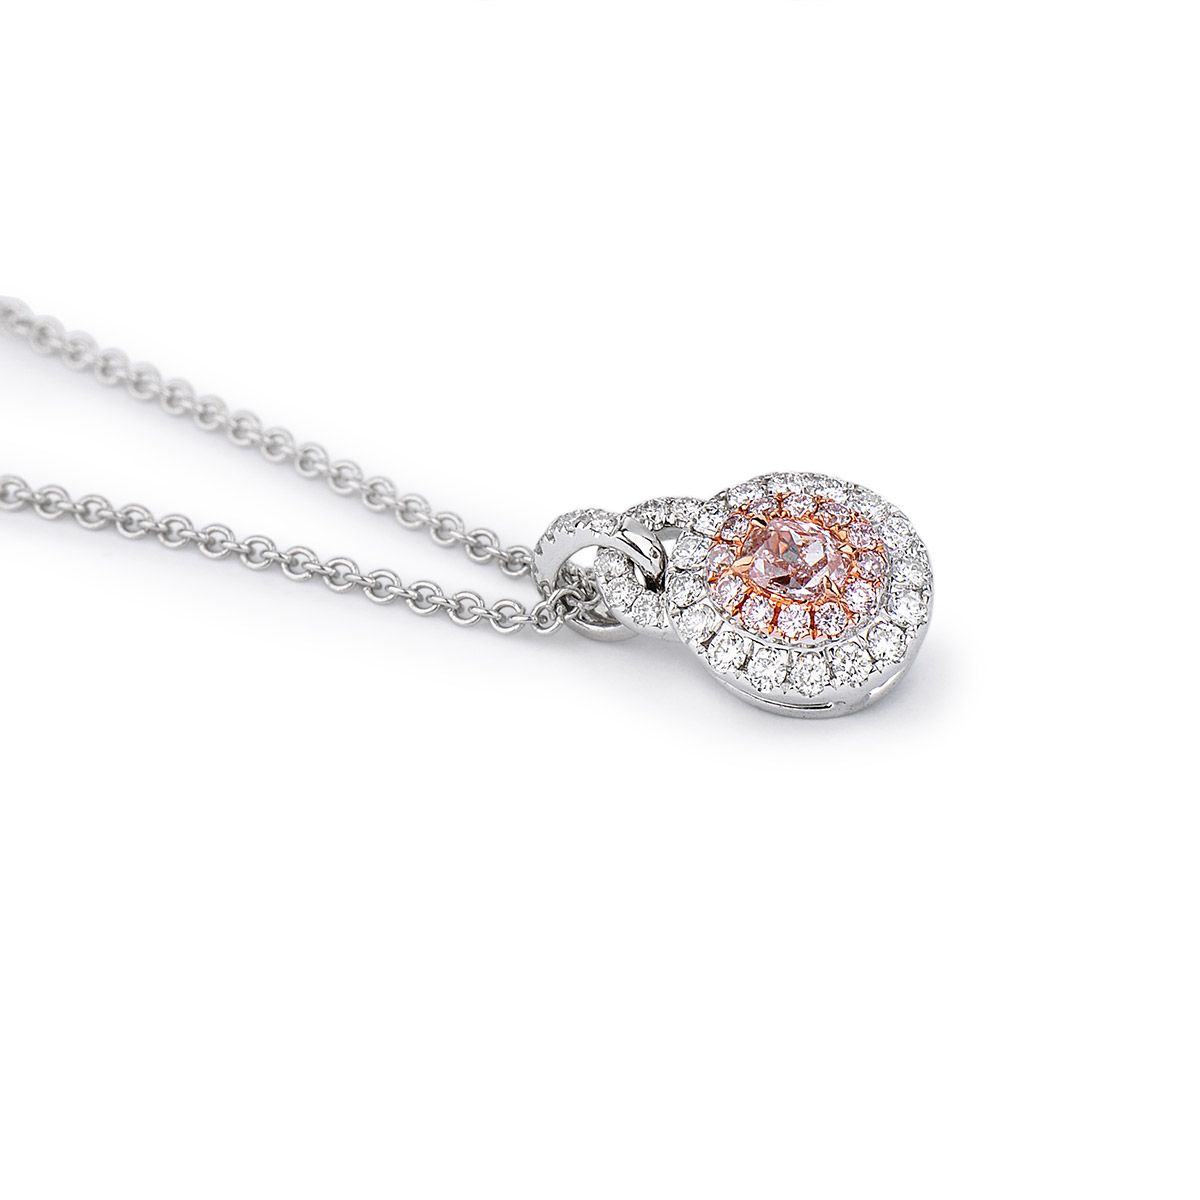 Faint Pink Diamond Necklace, 0.41 Ct. TW, Oval shape, GIA Certified, 5191255990